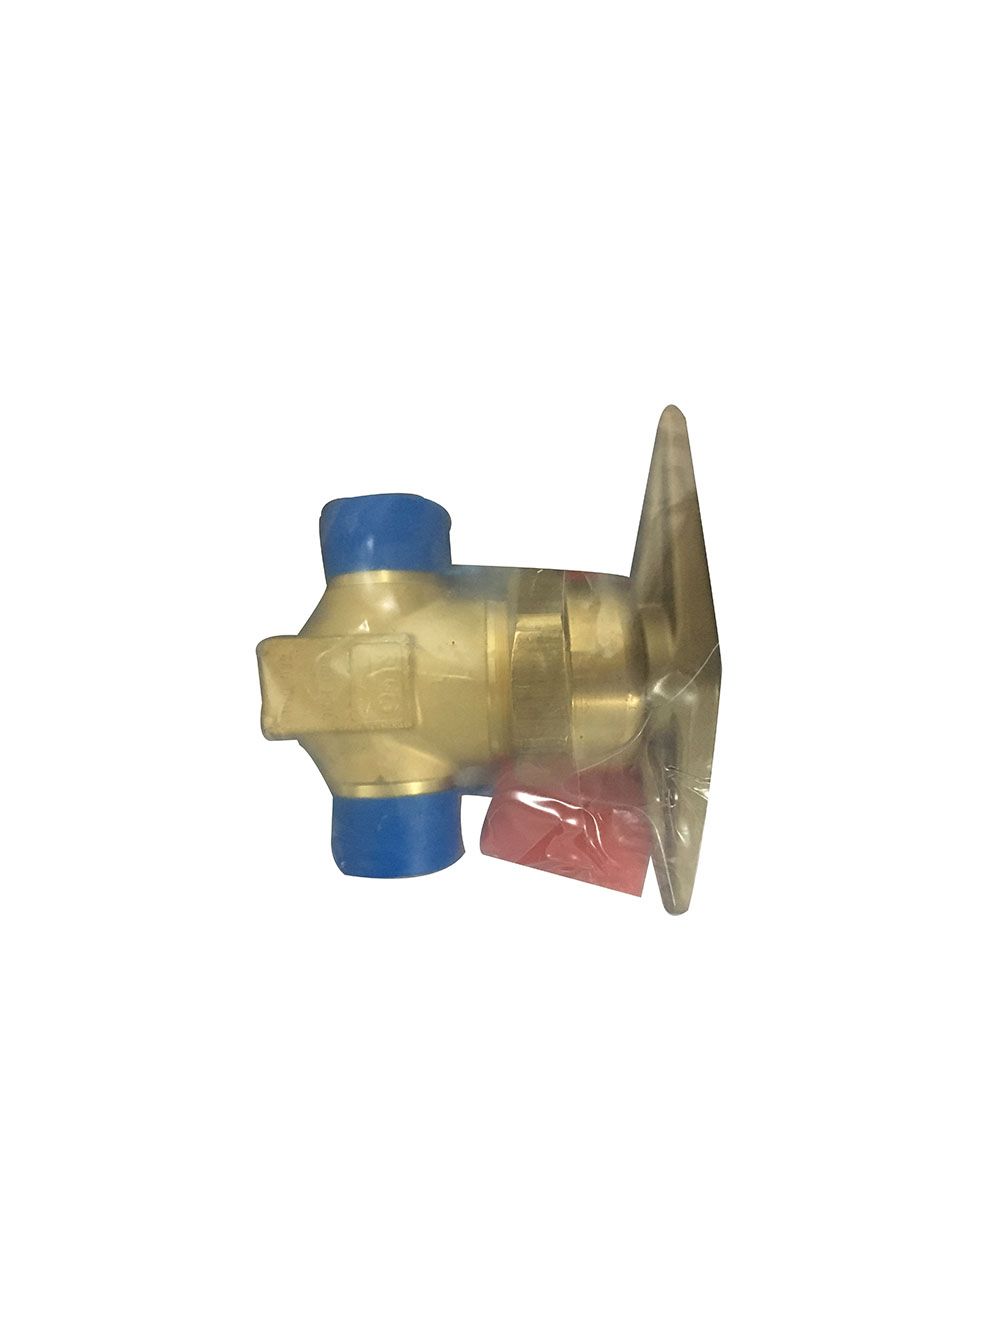 New In stock for sale, REGO Safety Valve T9464CA